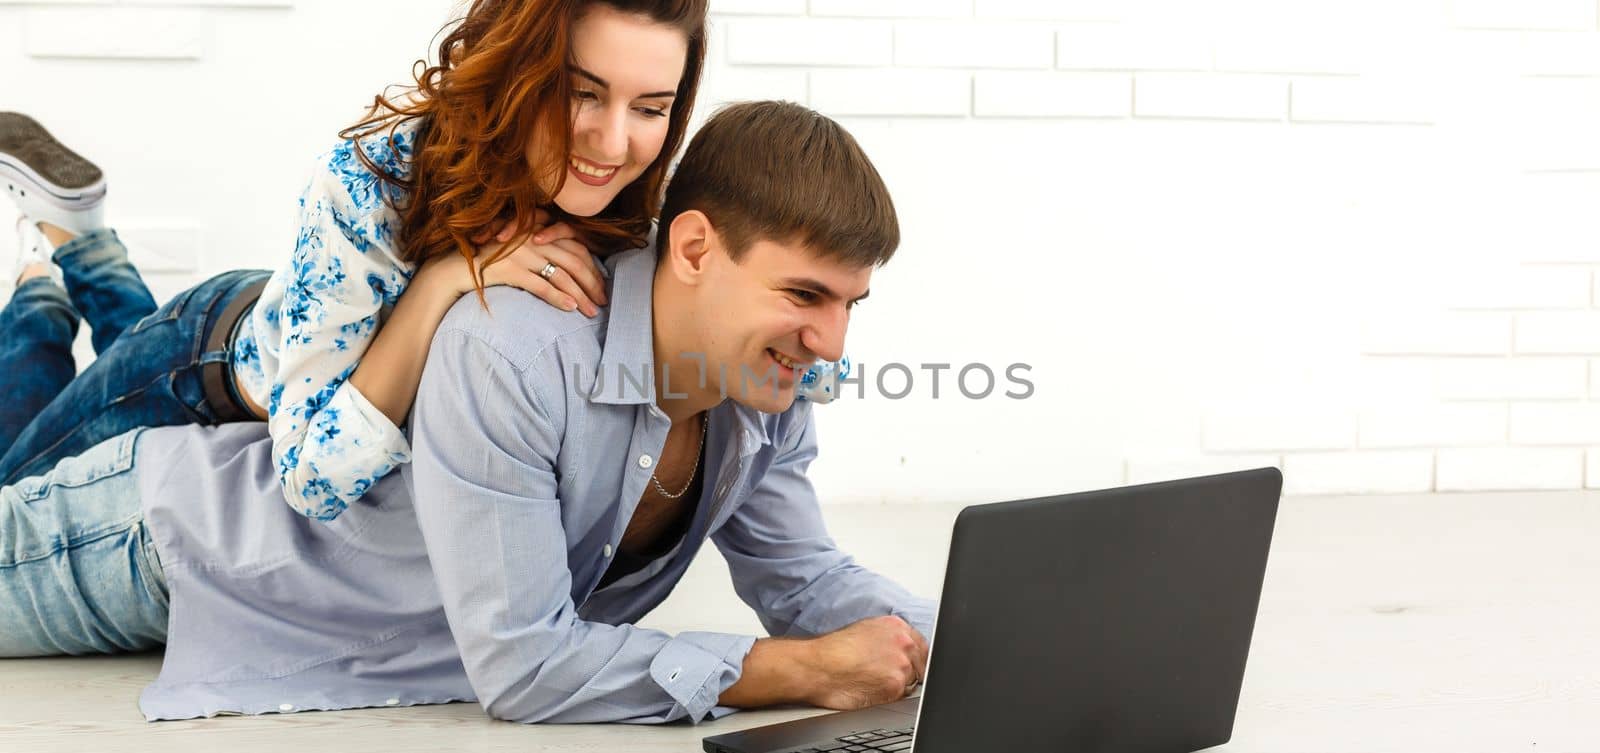 Couple buying online together with a laptop on a desktop at home by Andelov13